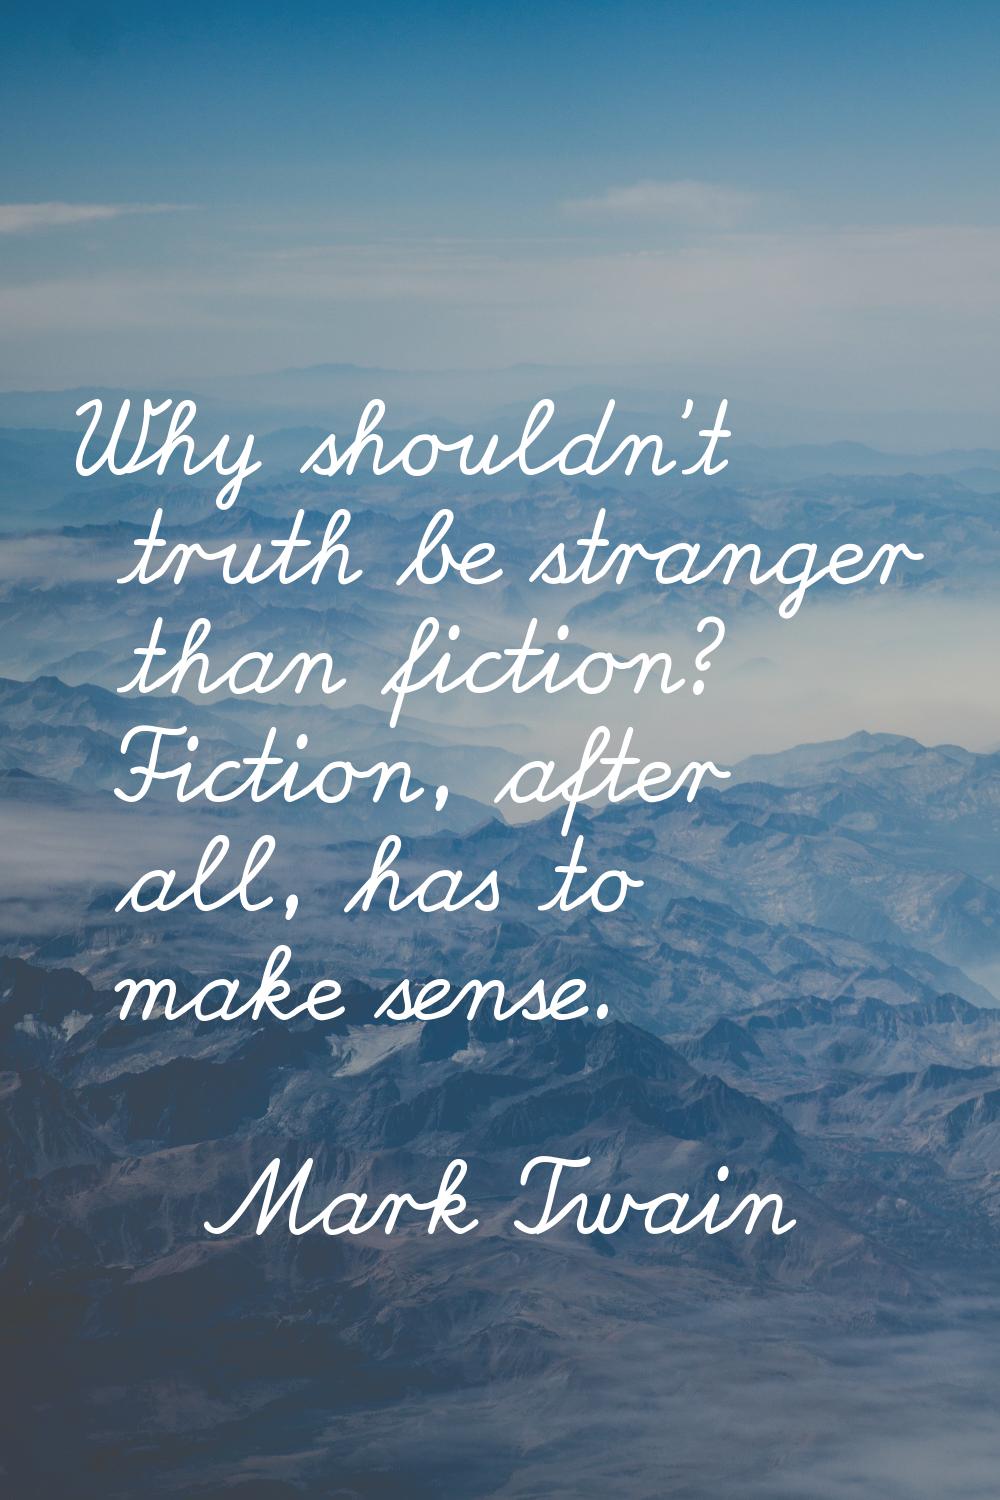 Why shouldn't truth be stranger than fiction? Fiction, after all, has to make sense.